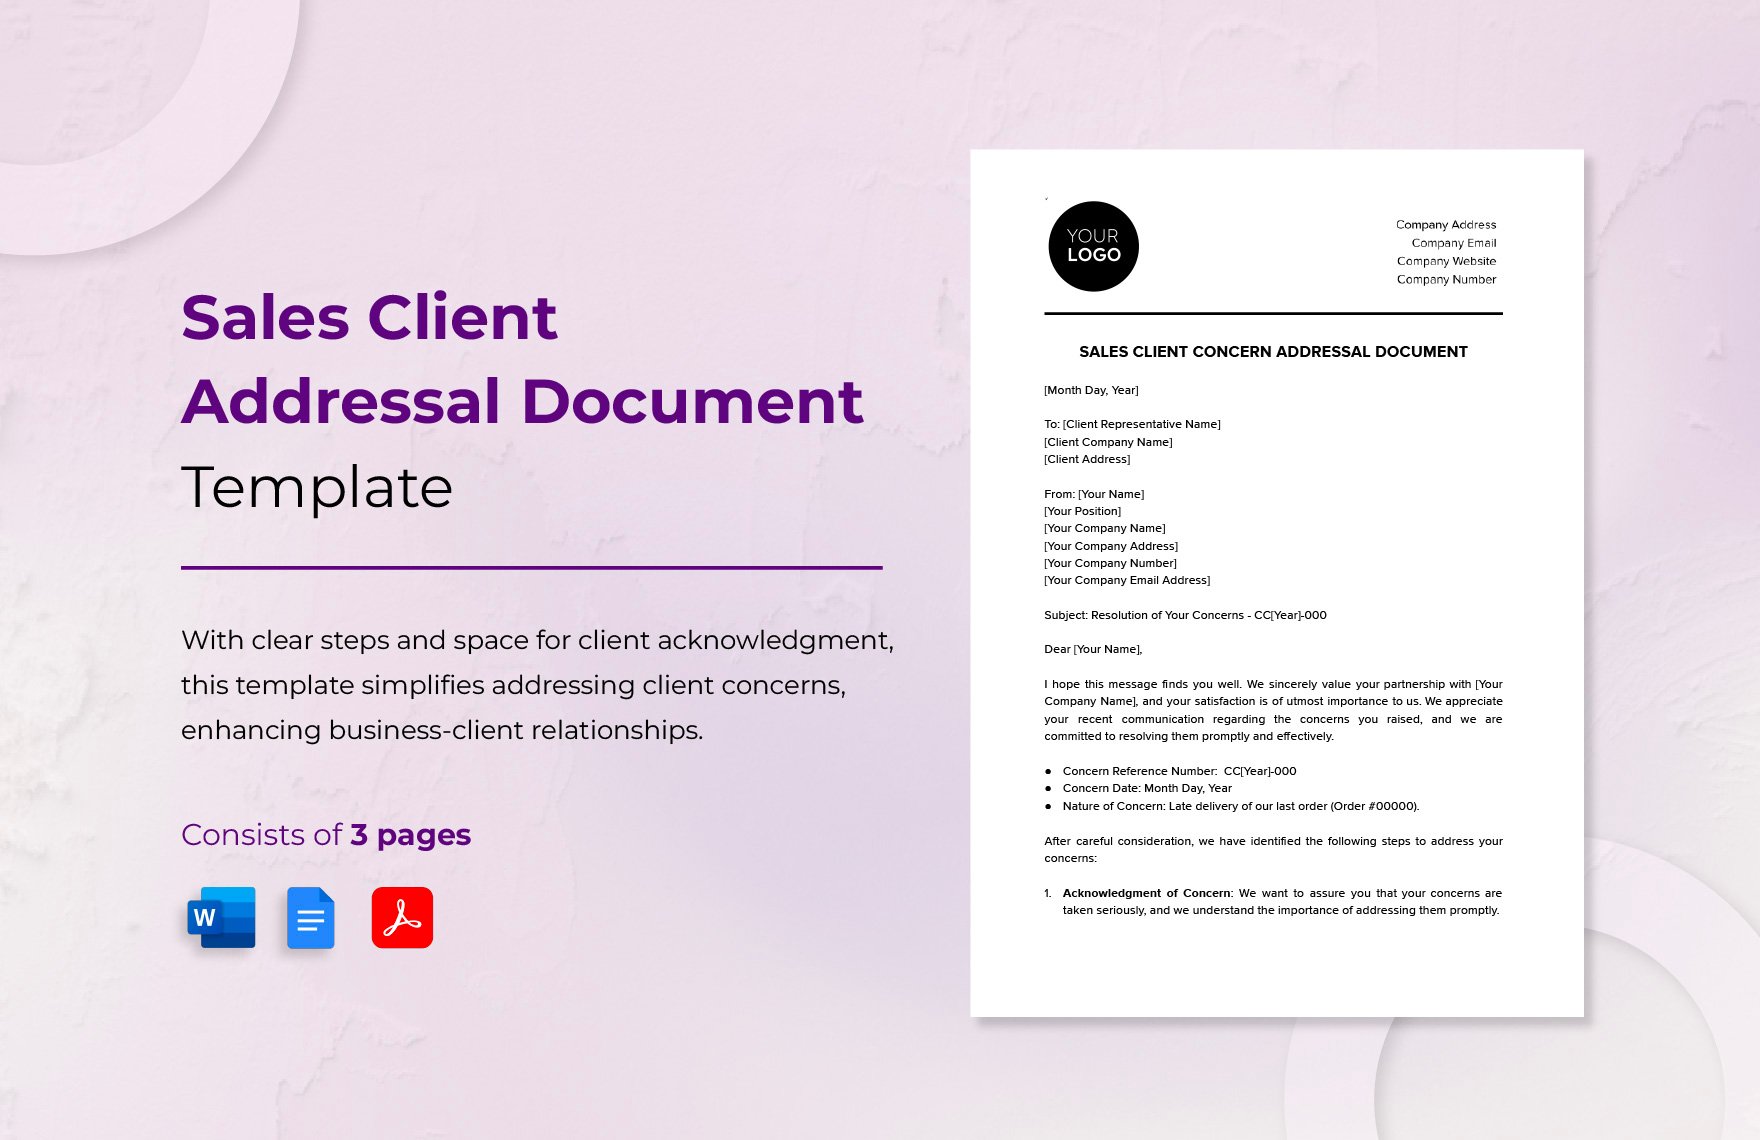 Sales Client Concern Addressal Document Template in Word, Google Docs, PDF